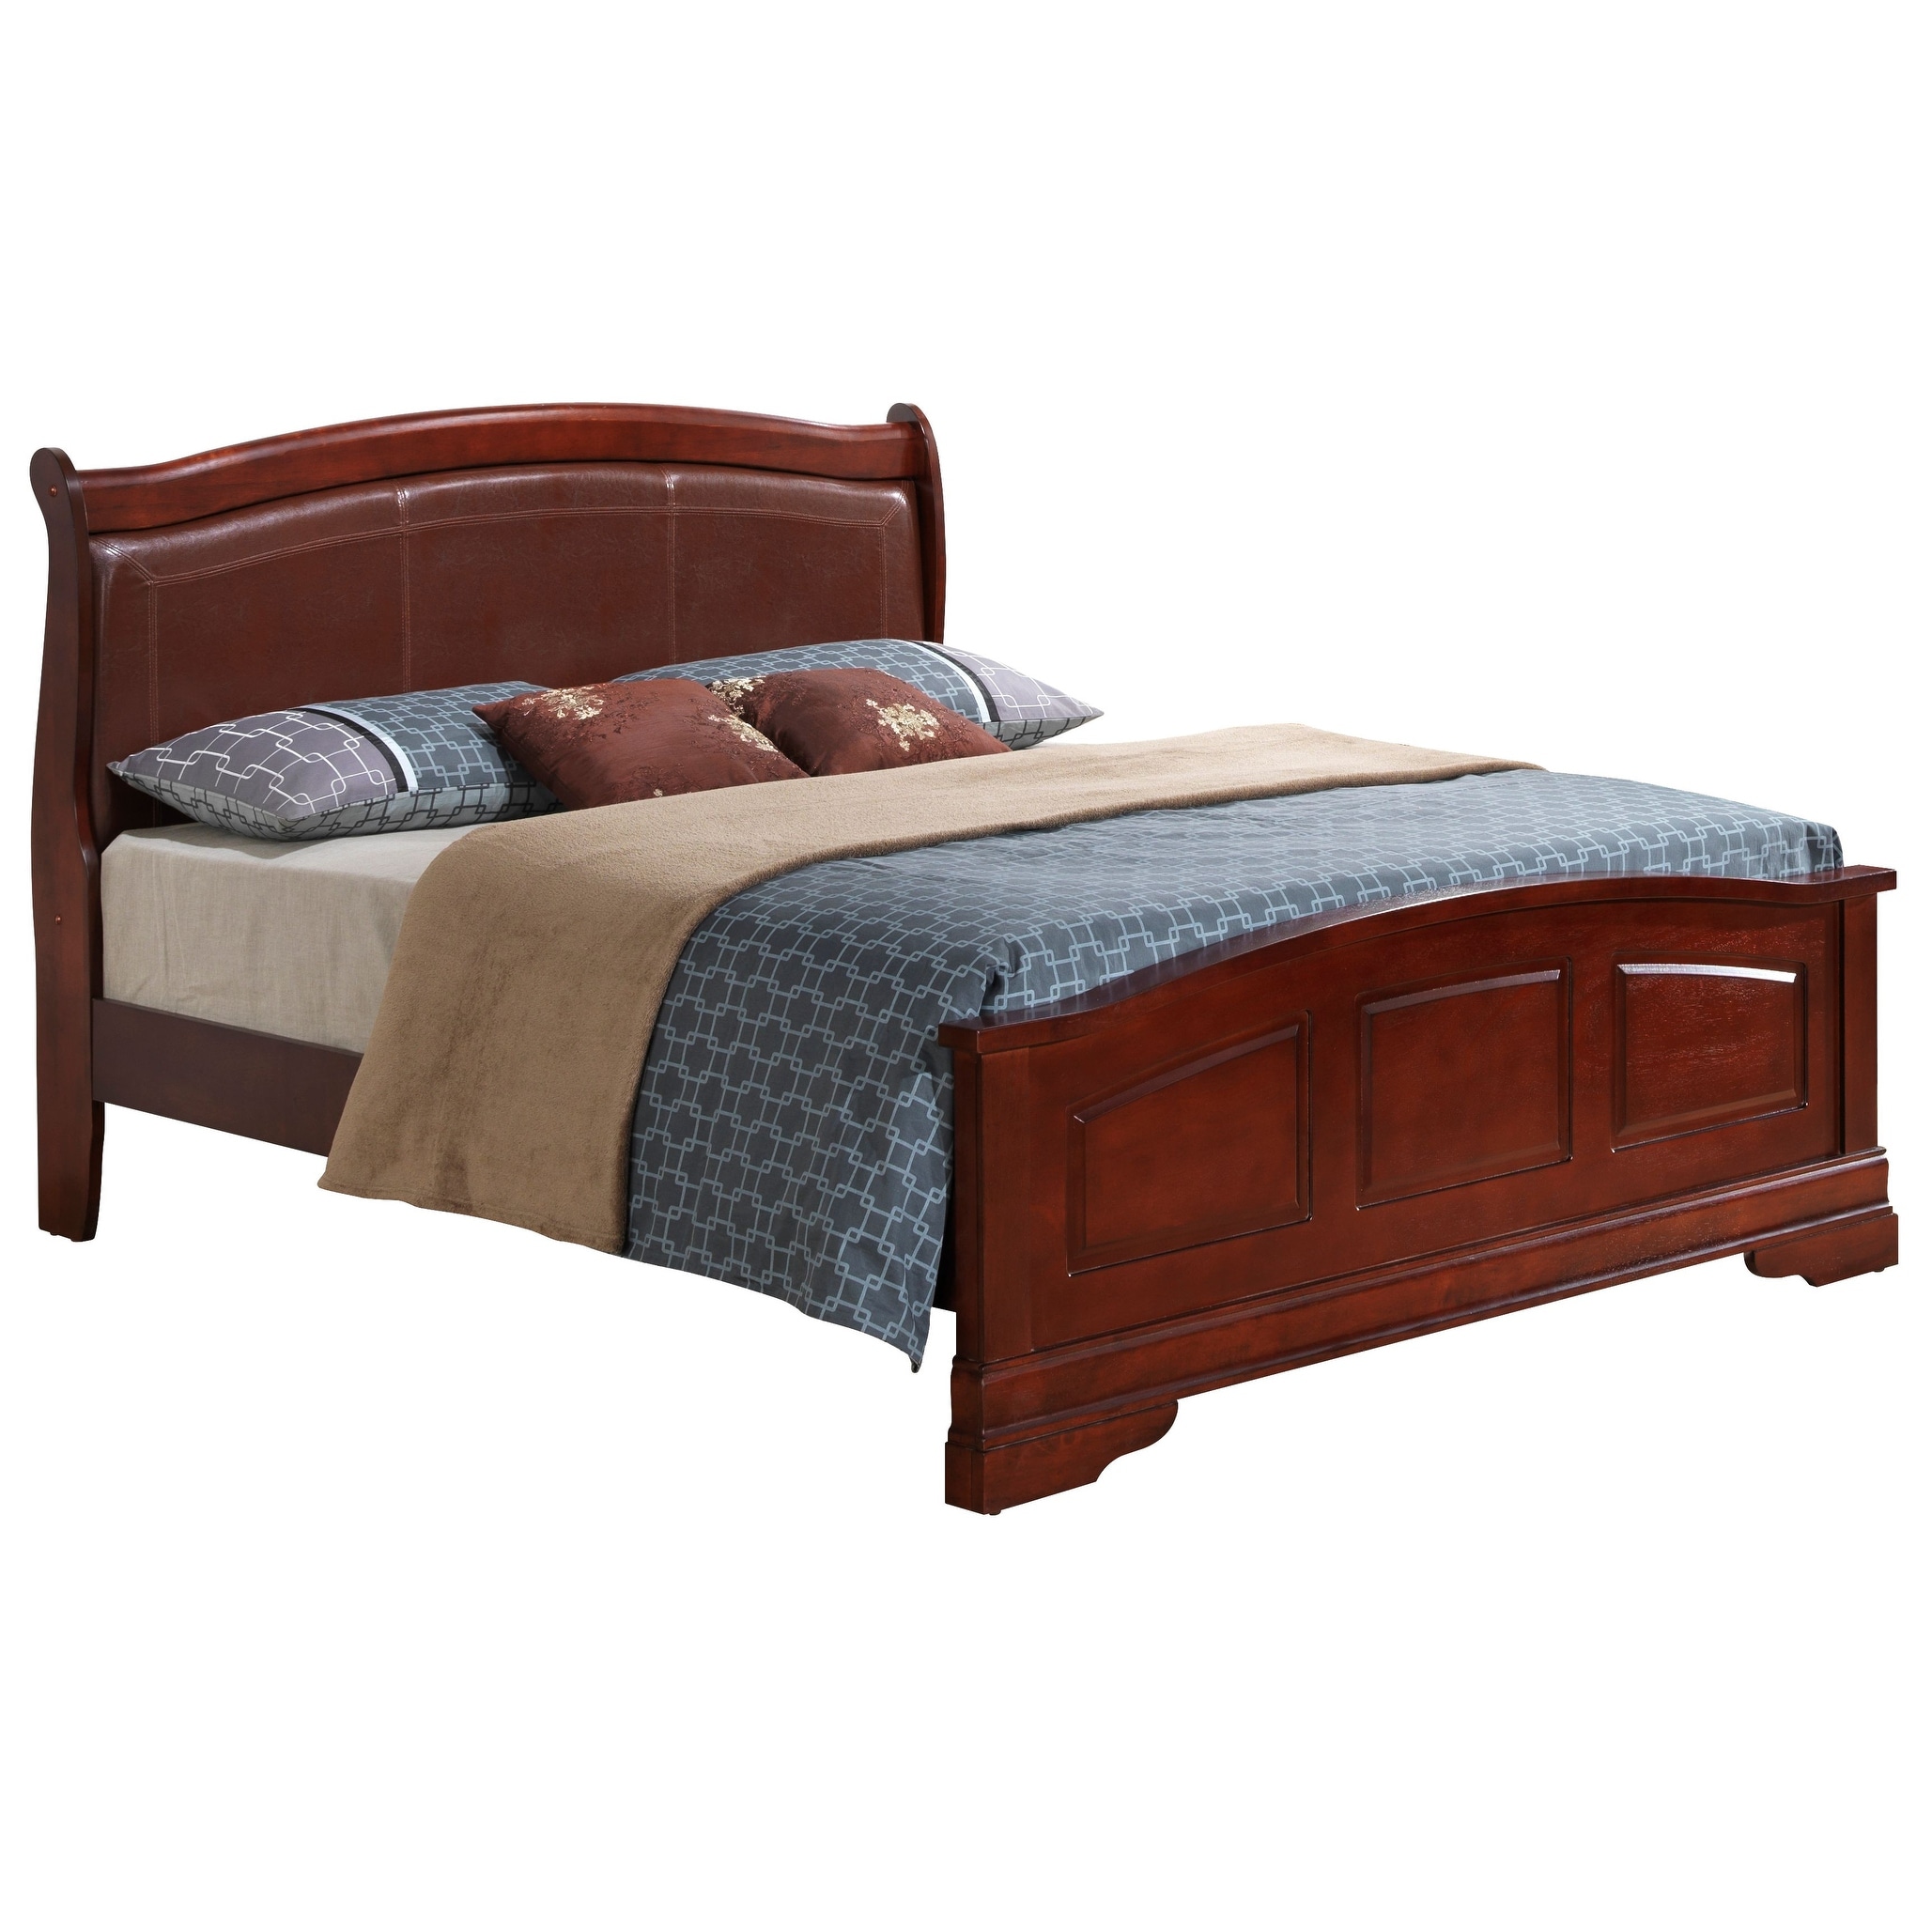 Louis Phillipe Faux Leather and Wood Bed - Bed Bath & Beyond